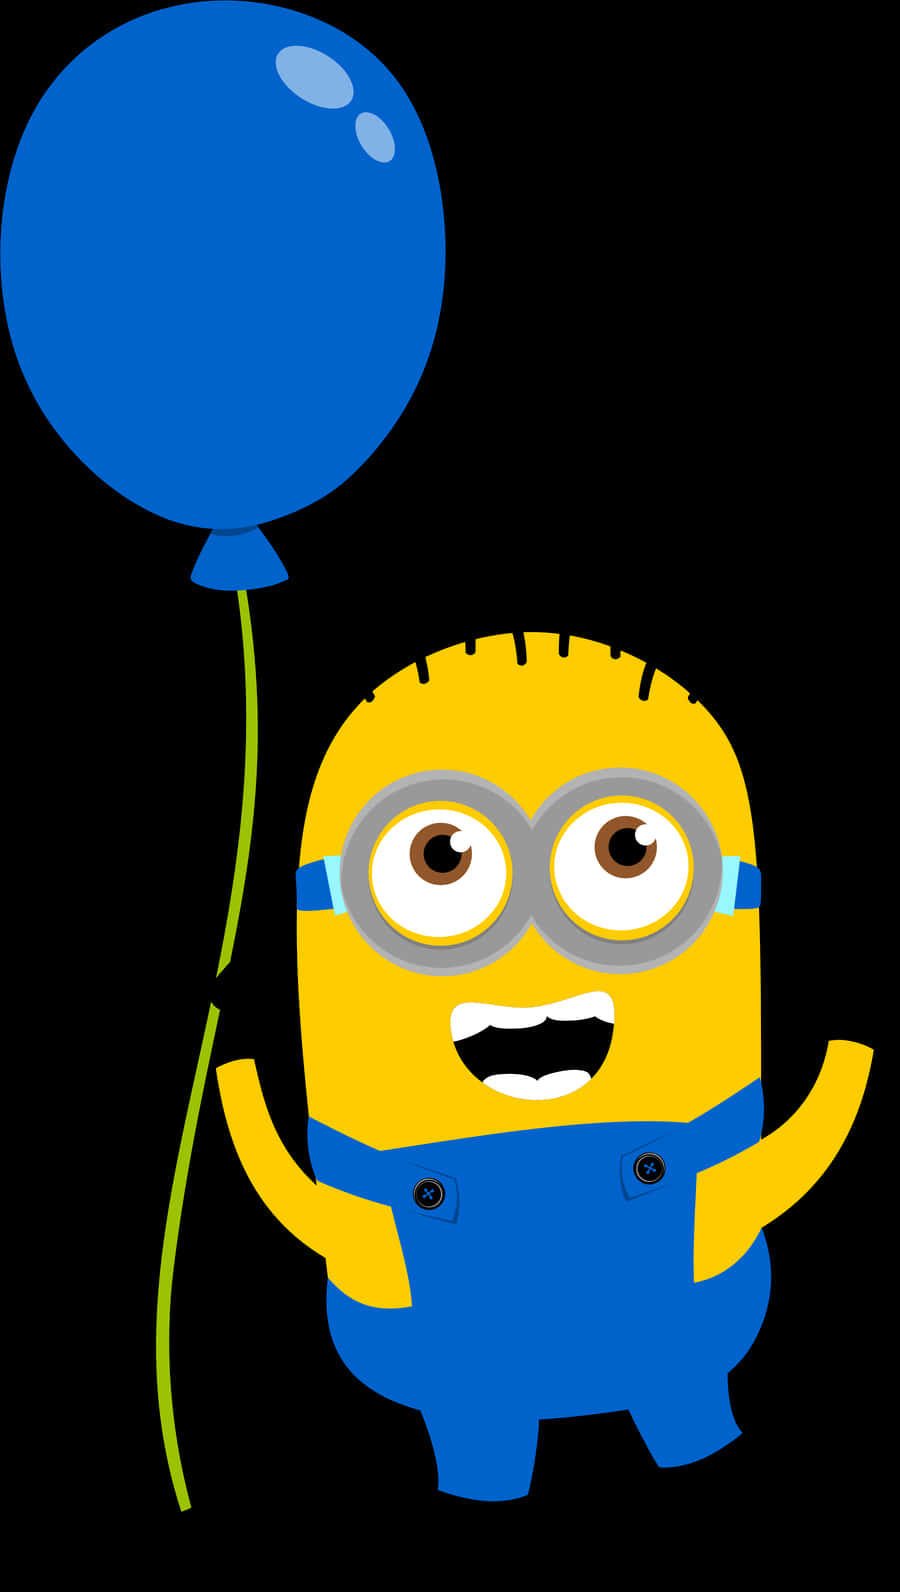 Minion With Blue Balloon PNG